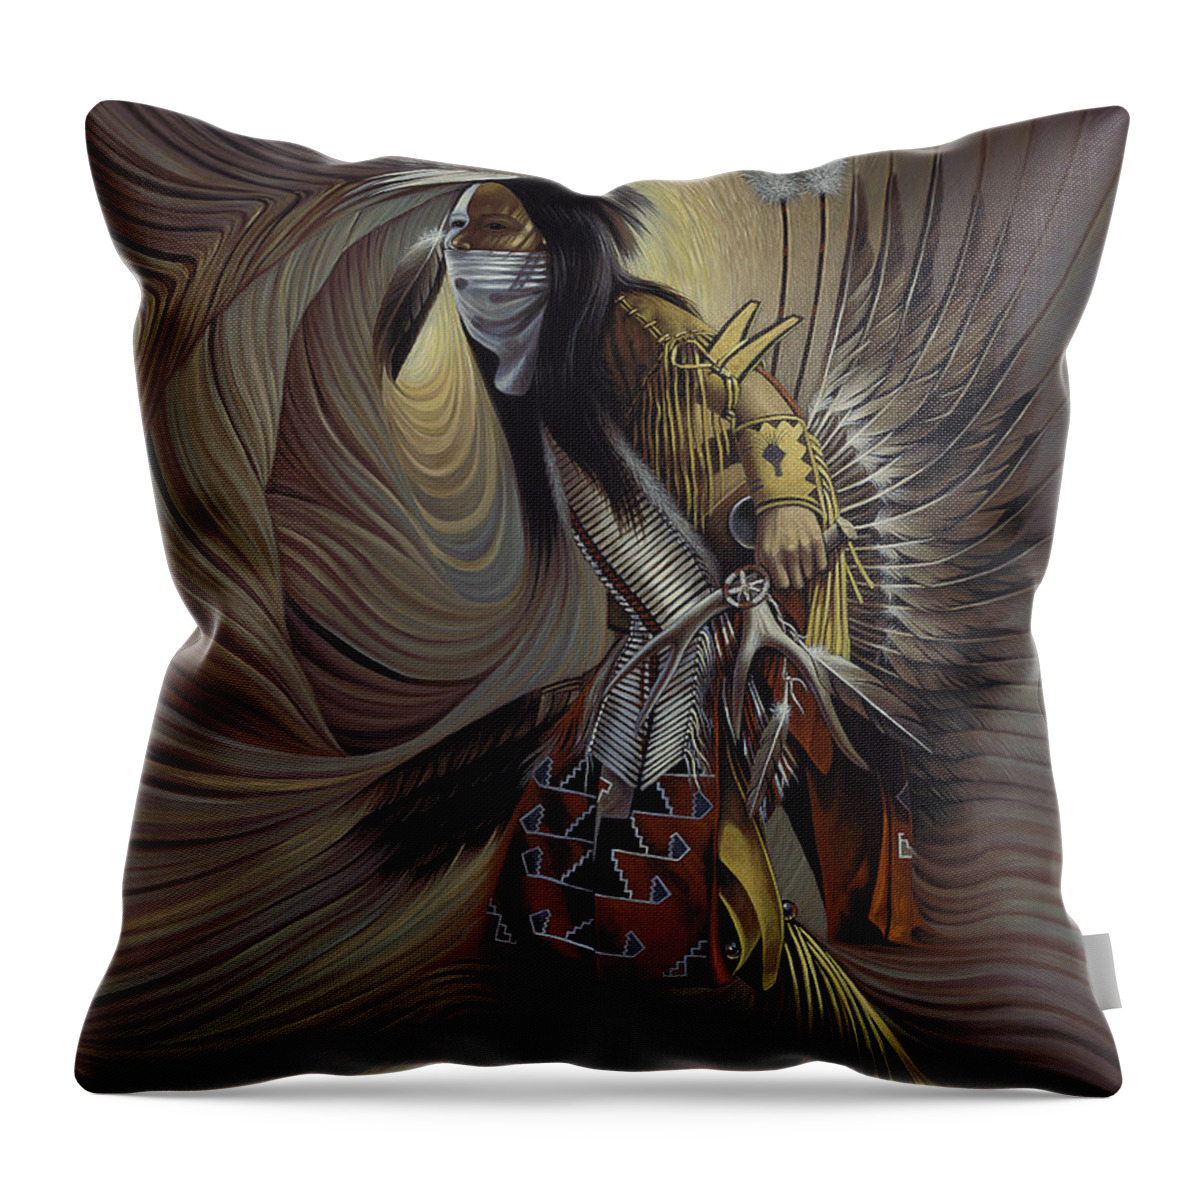 Native-american Throw Pillow featuring the painting On Sacred Ground Series IIl by Ricardo Chavez-Mendez